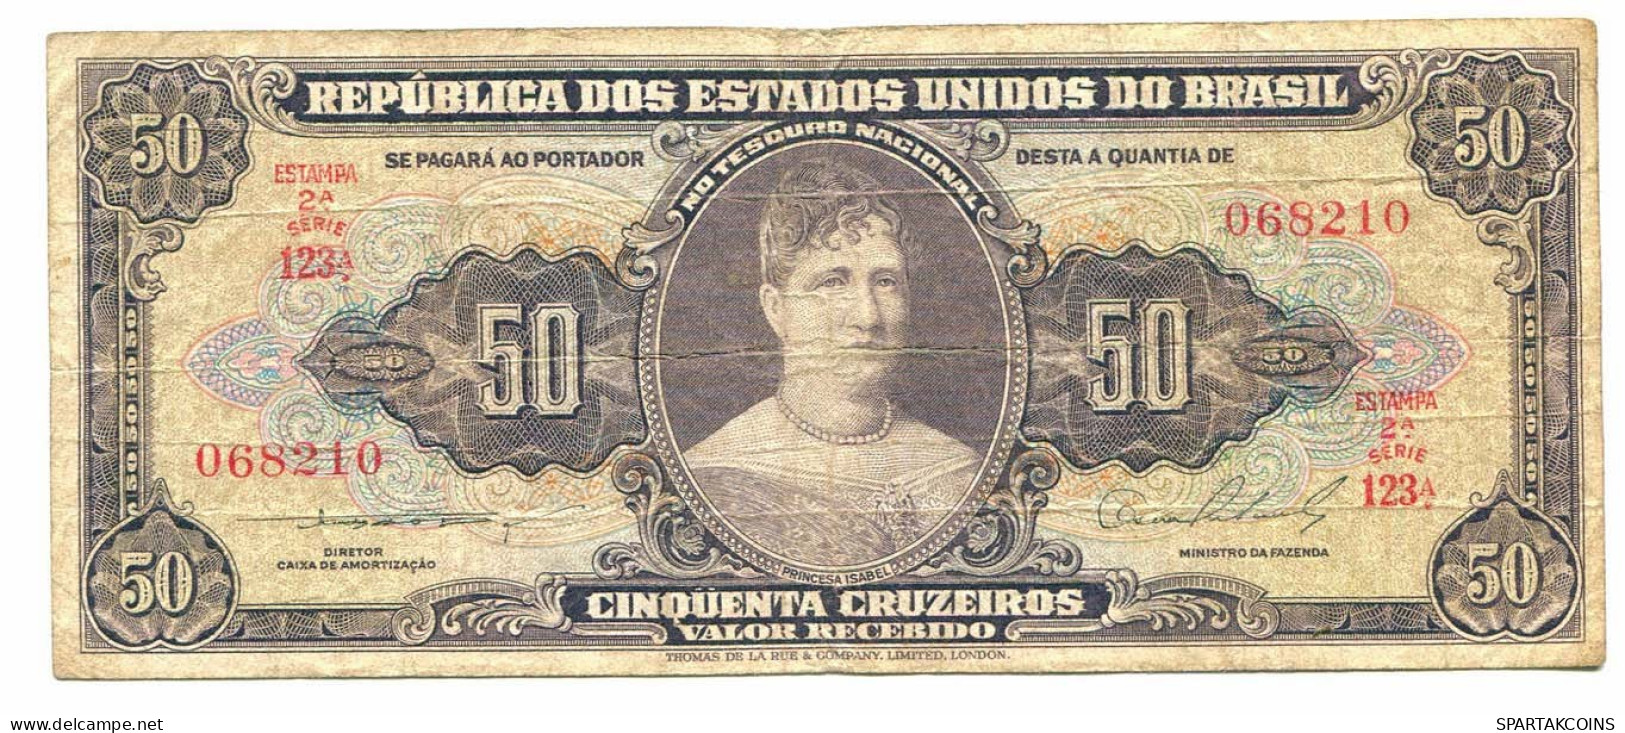 BRASIL 50 CRUZEIROS 1967 SERIE 123A Paper Money Banknote #P10840.4 - [11] Emissions Locales